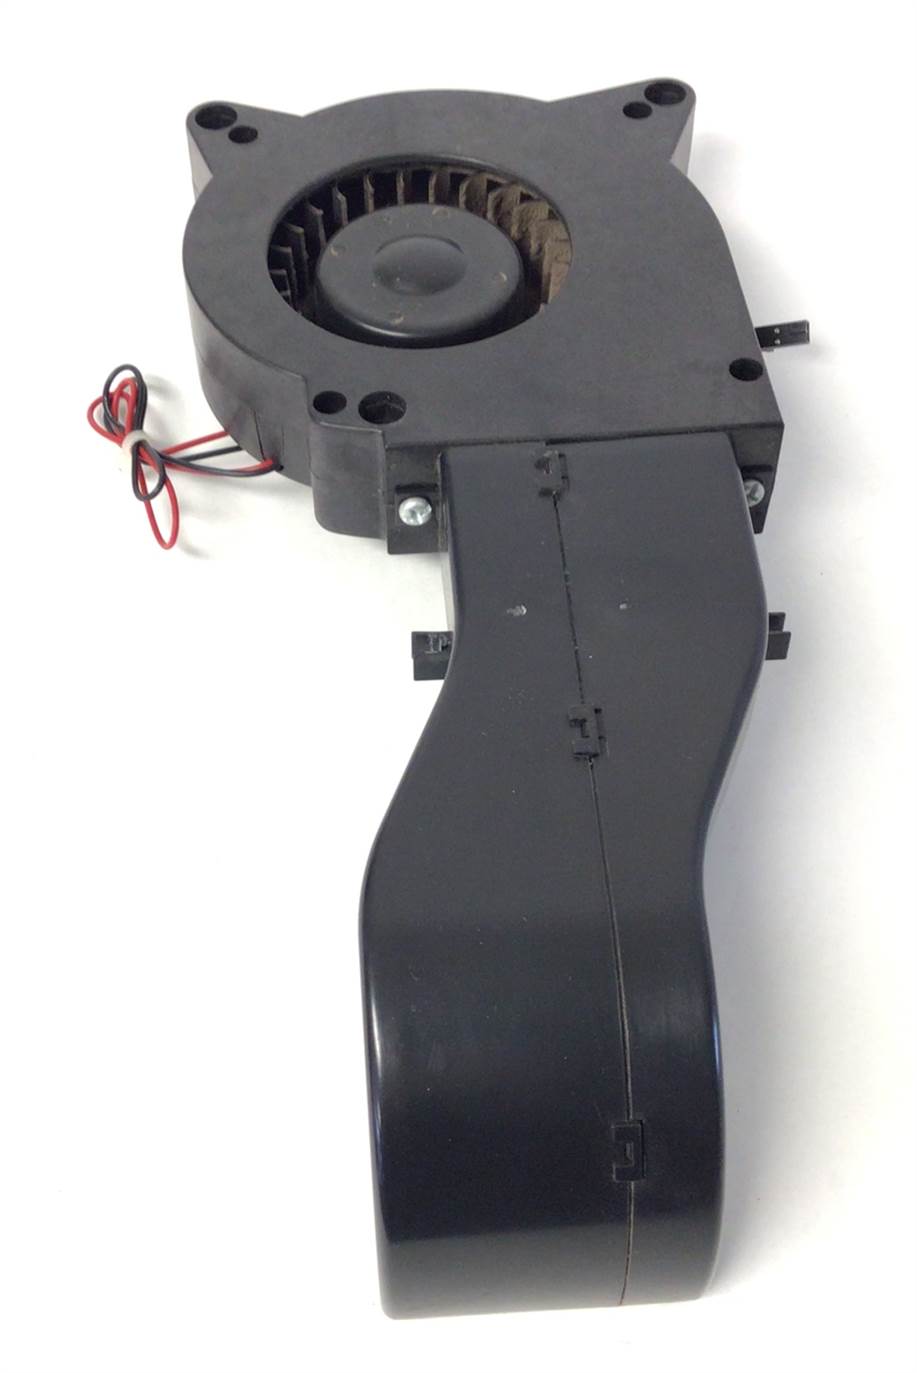 Console Display Fan and Duct Funnel Air Guide (Used)